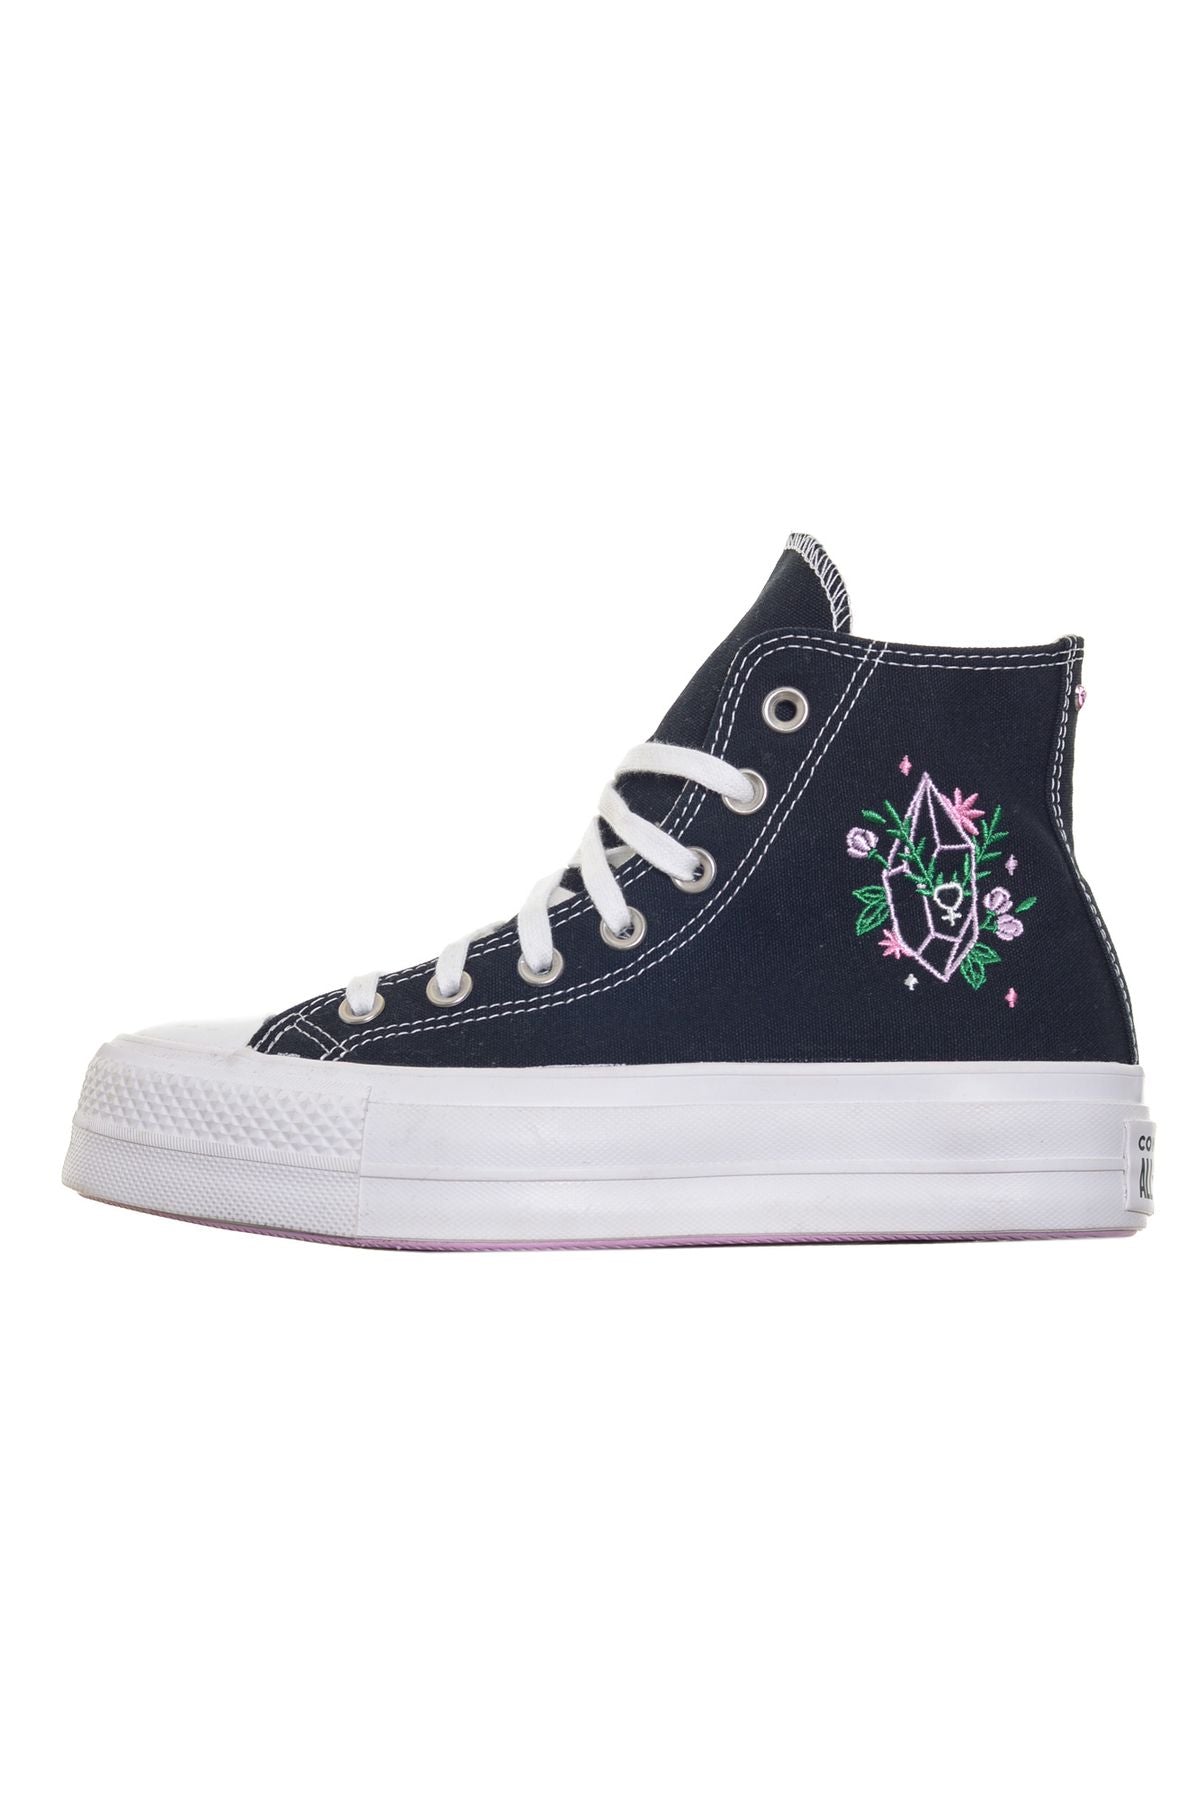 CONVERSE Spring/Summer Sneakers a03739c